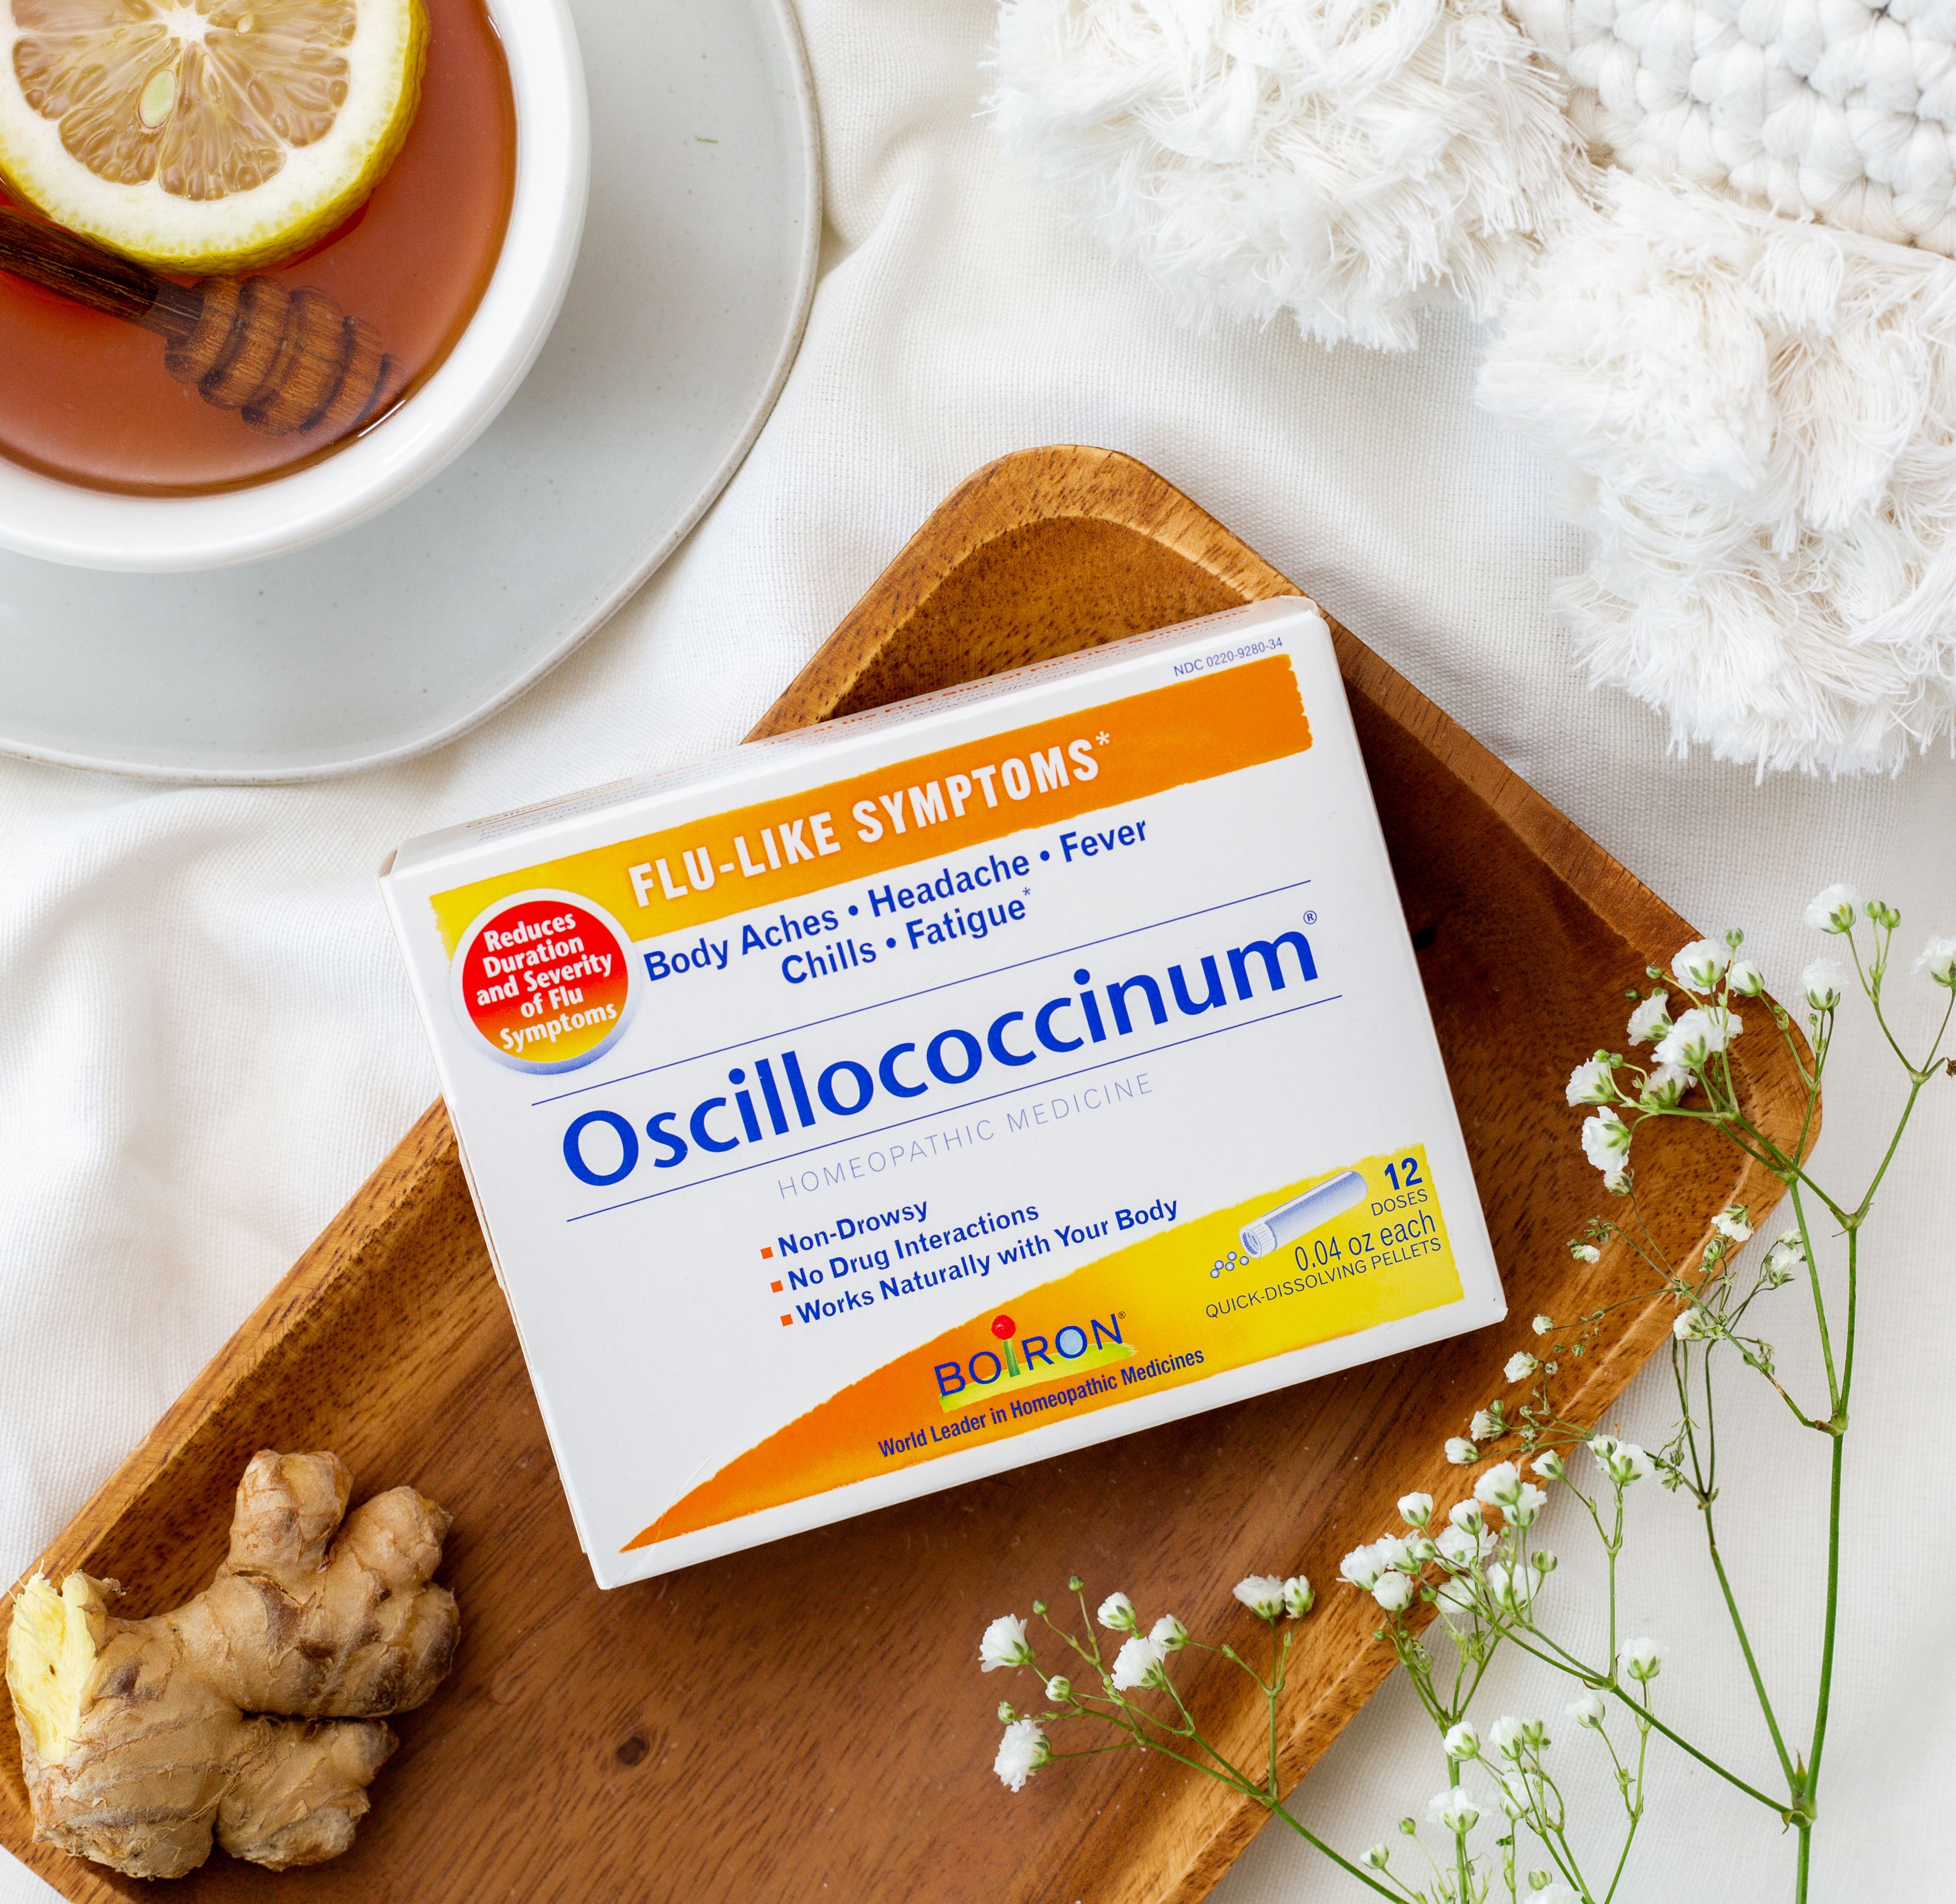 Boiron Oscillococcinum Homeopathic Medicine for Flu-like Symptoms, 12 Count - image 2 of 9